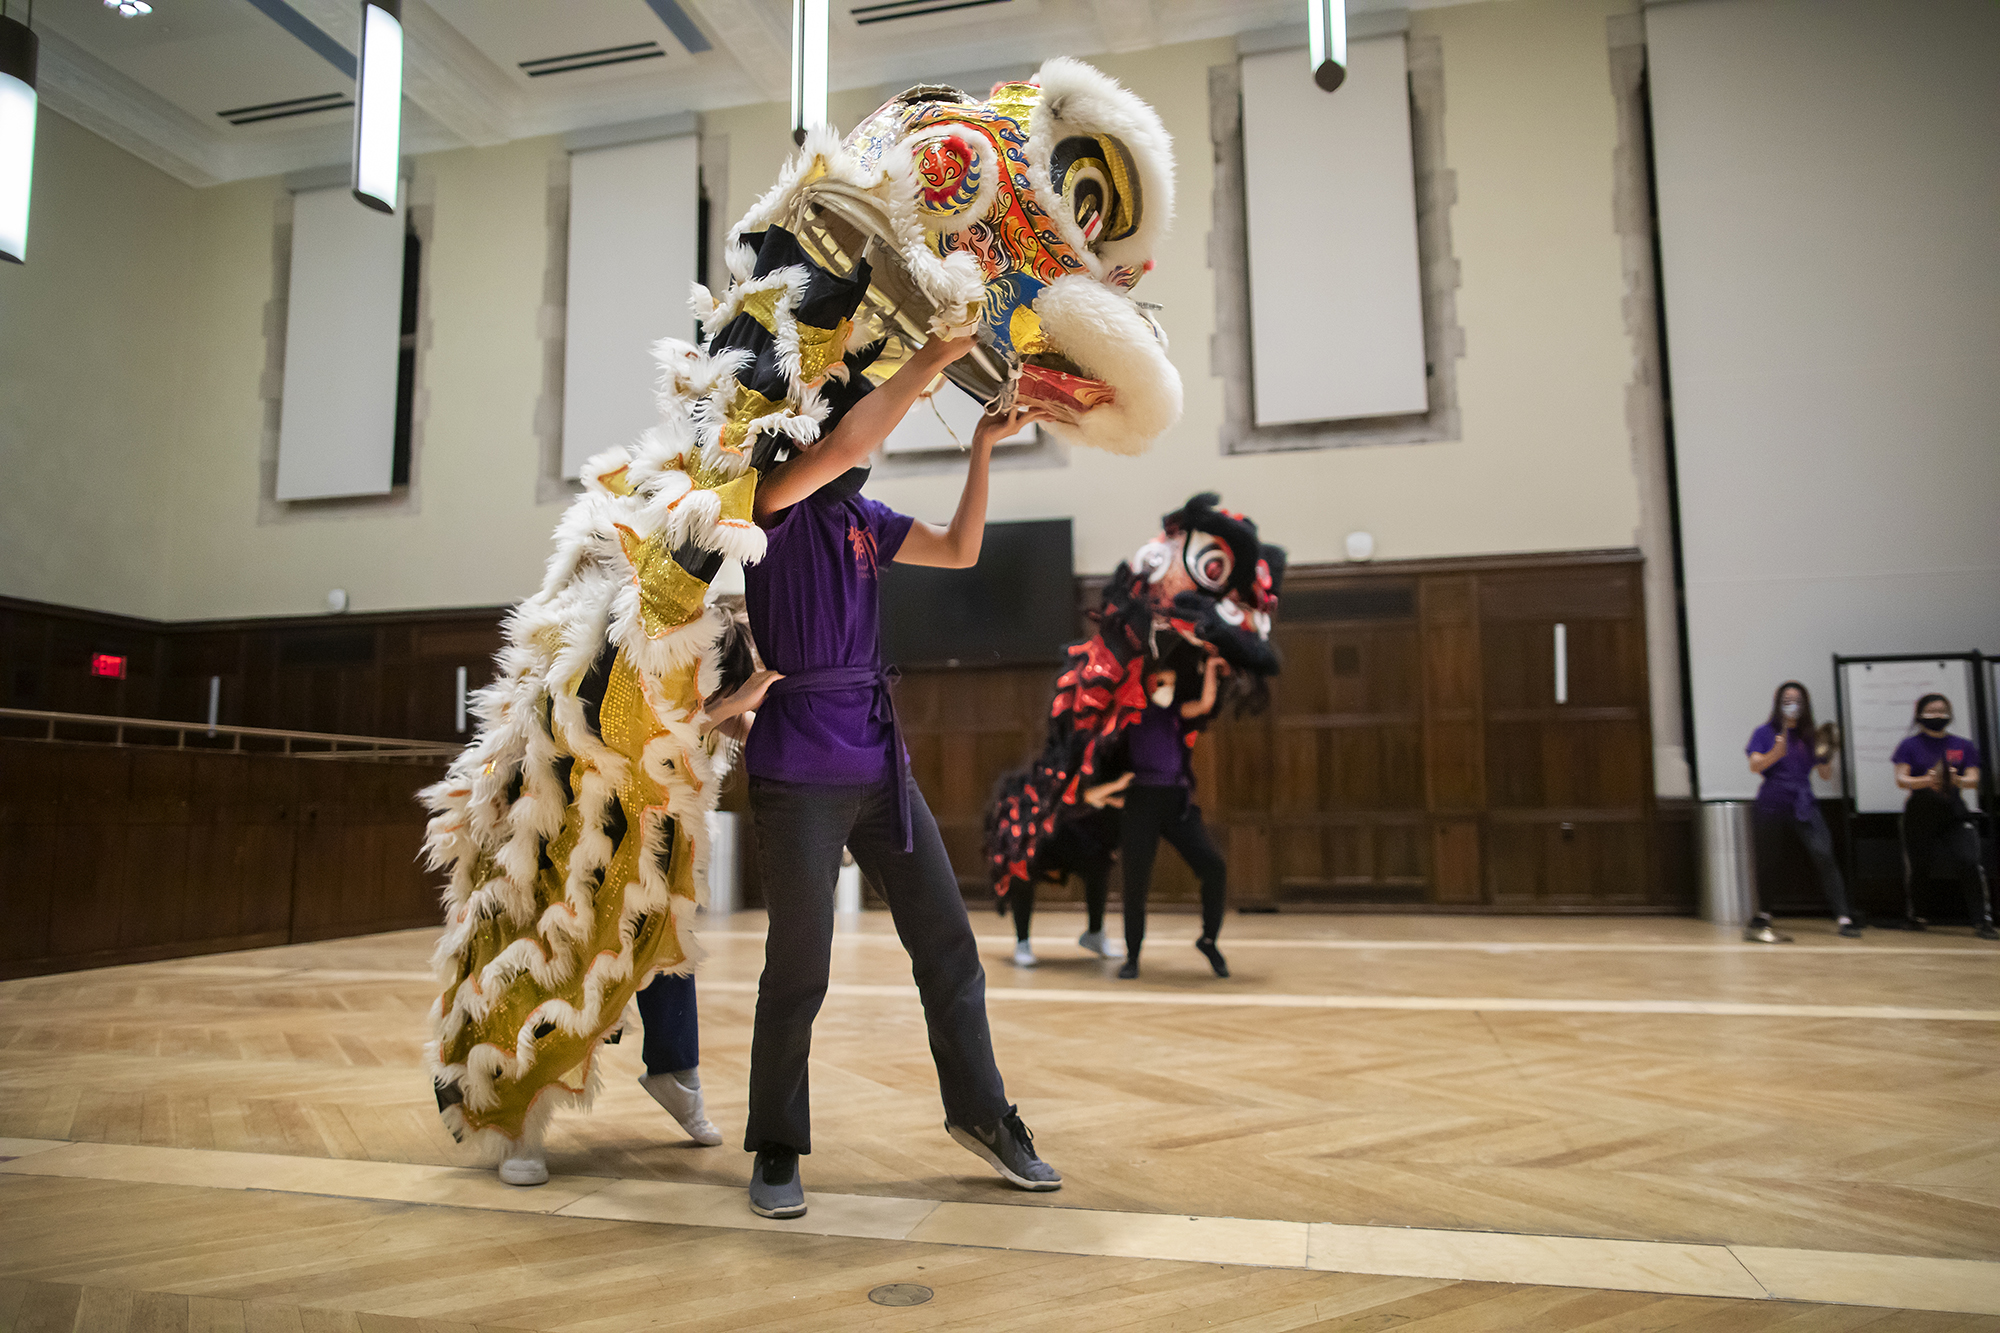 Two pairs of lion dancers practice in a large auditorium with cymbal players in the background